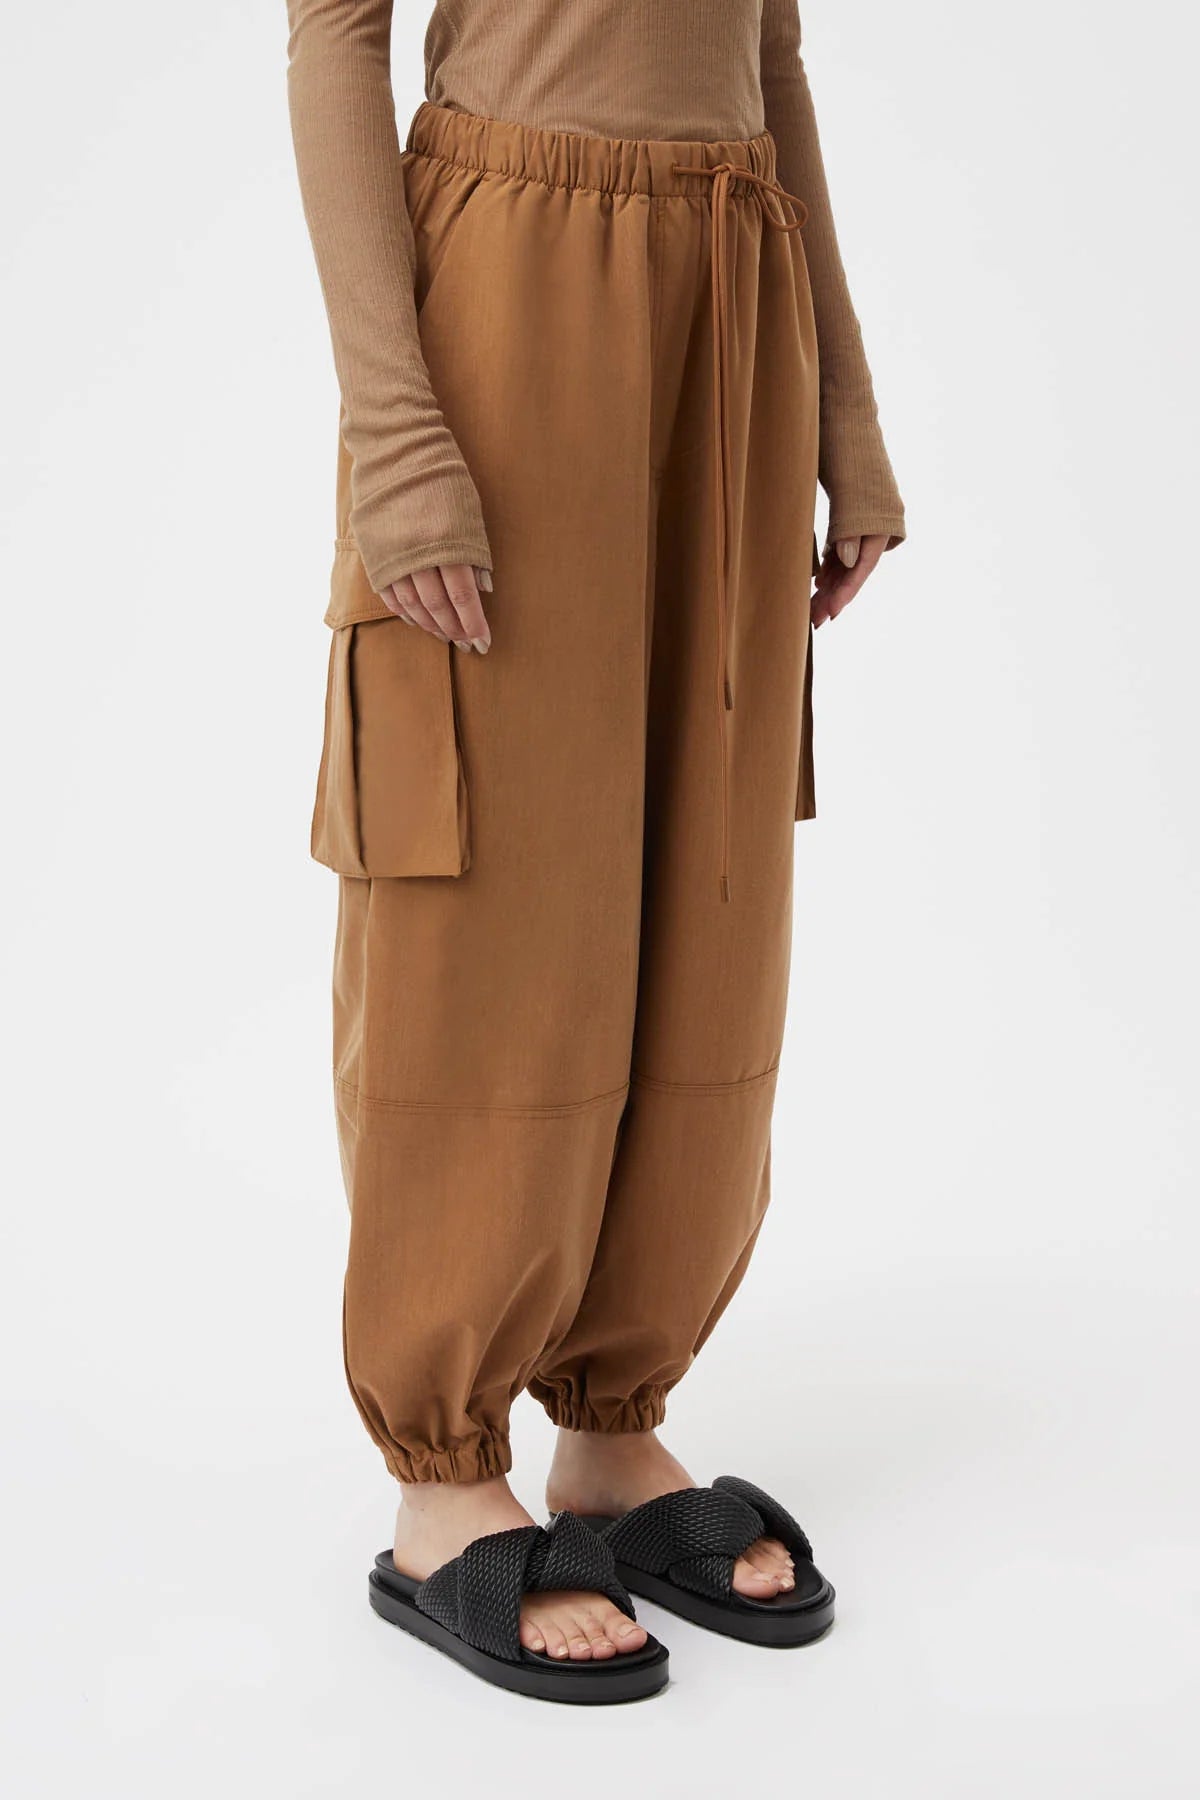 Camilla and Marc Archer Cargo Pant - Toffee